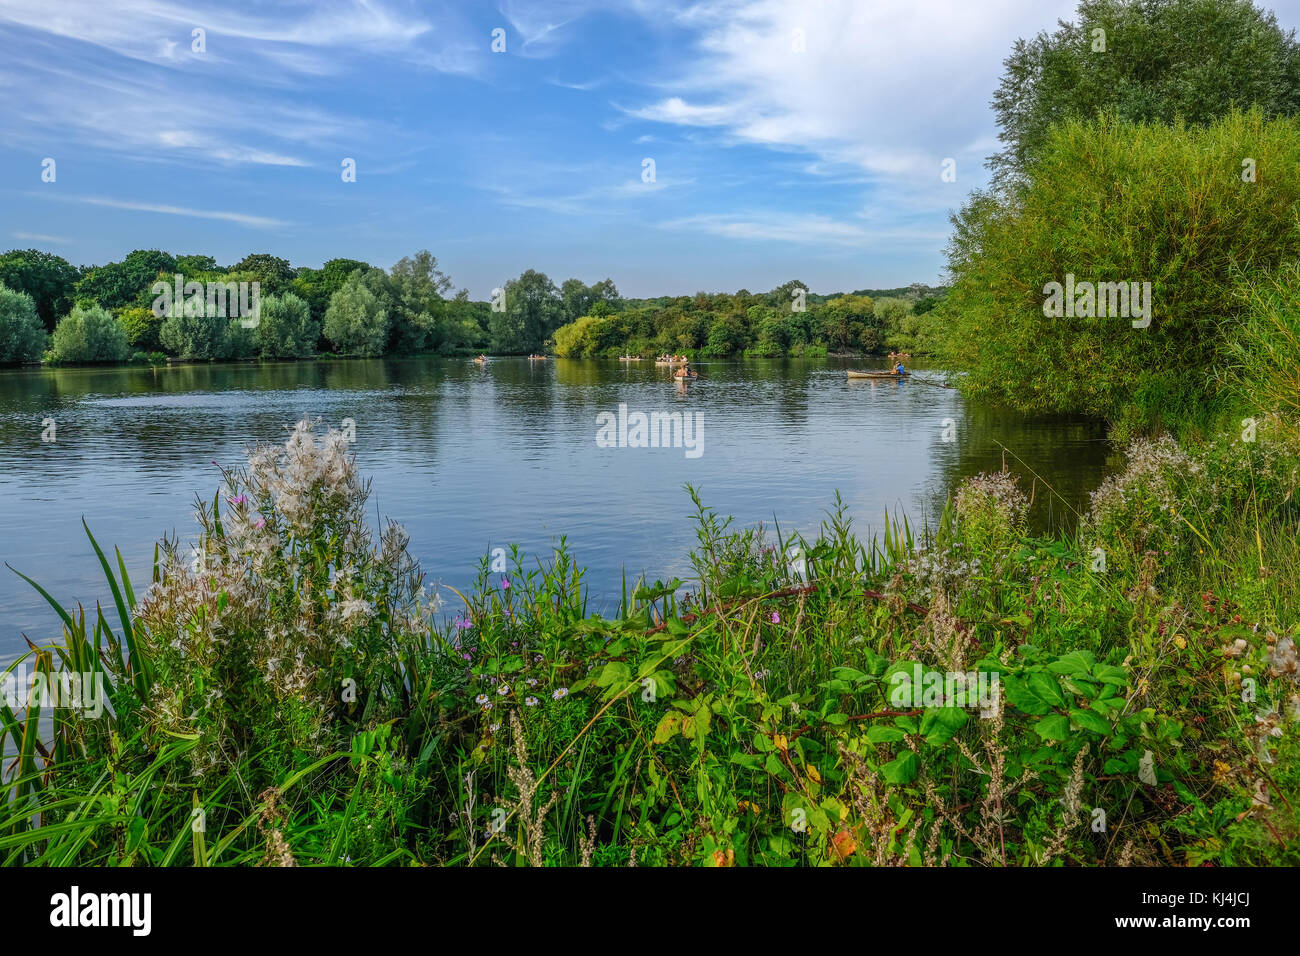 Boats on the lake in a country park on a summer day.  Wild plants in the foreground. Stock Photo